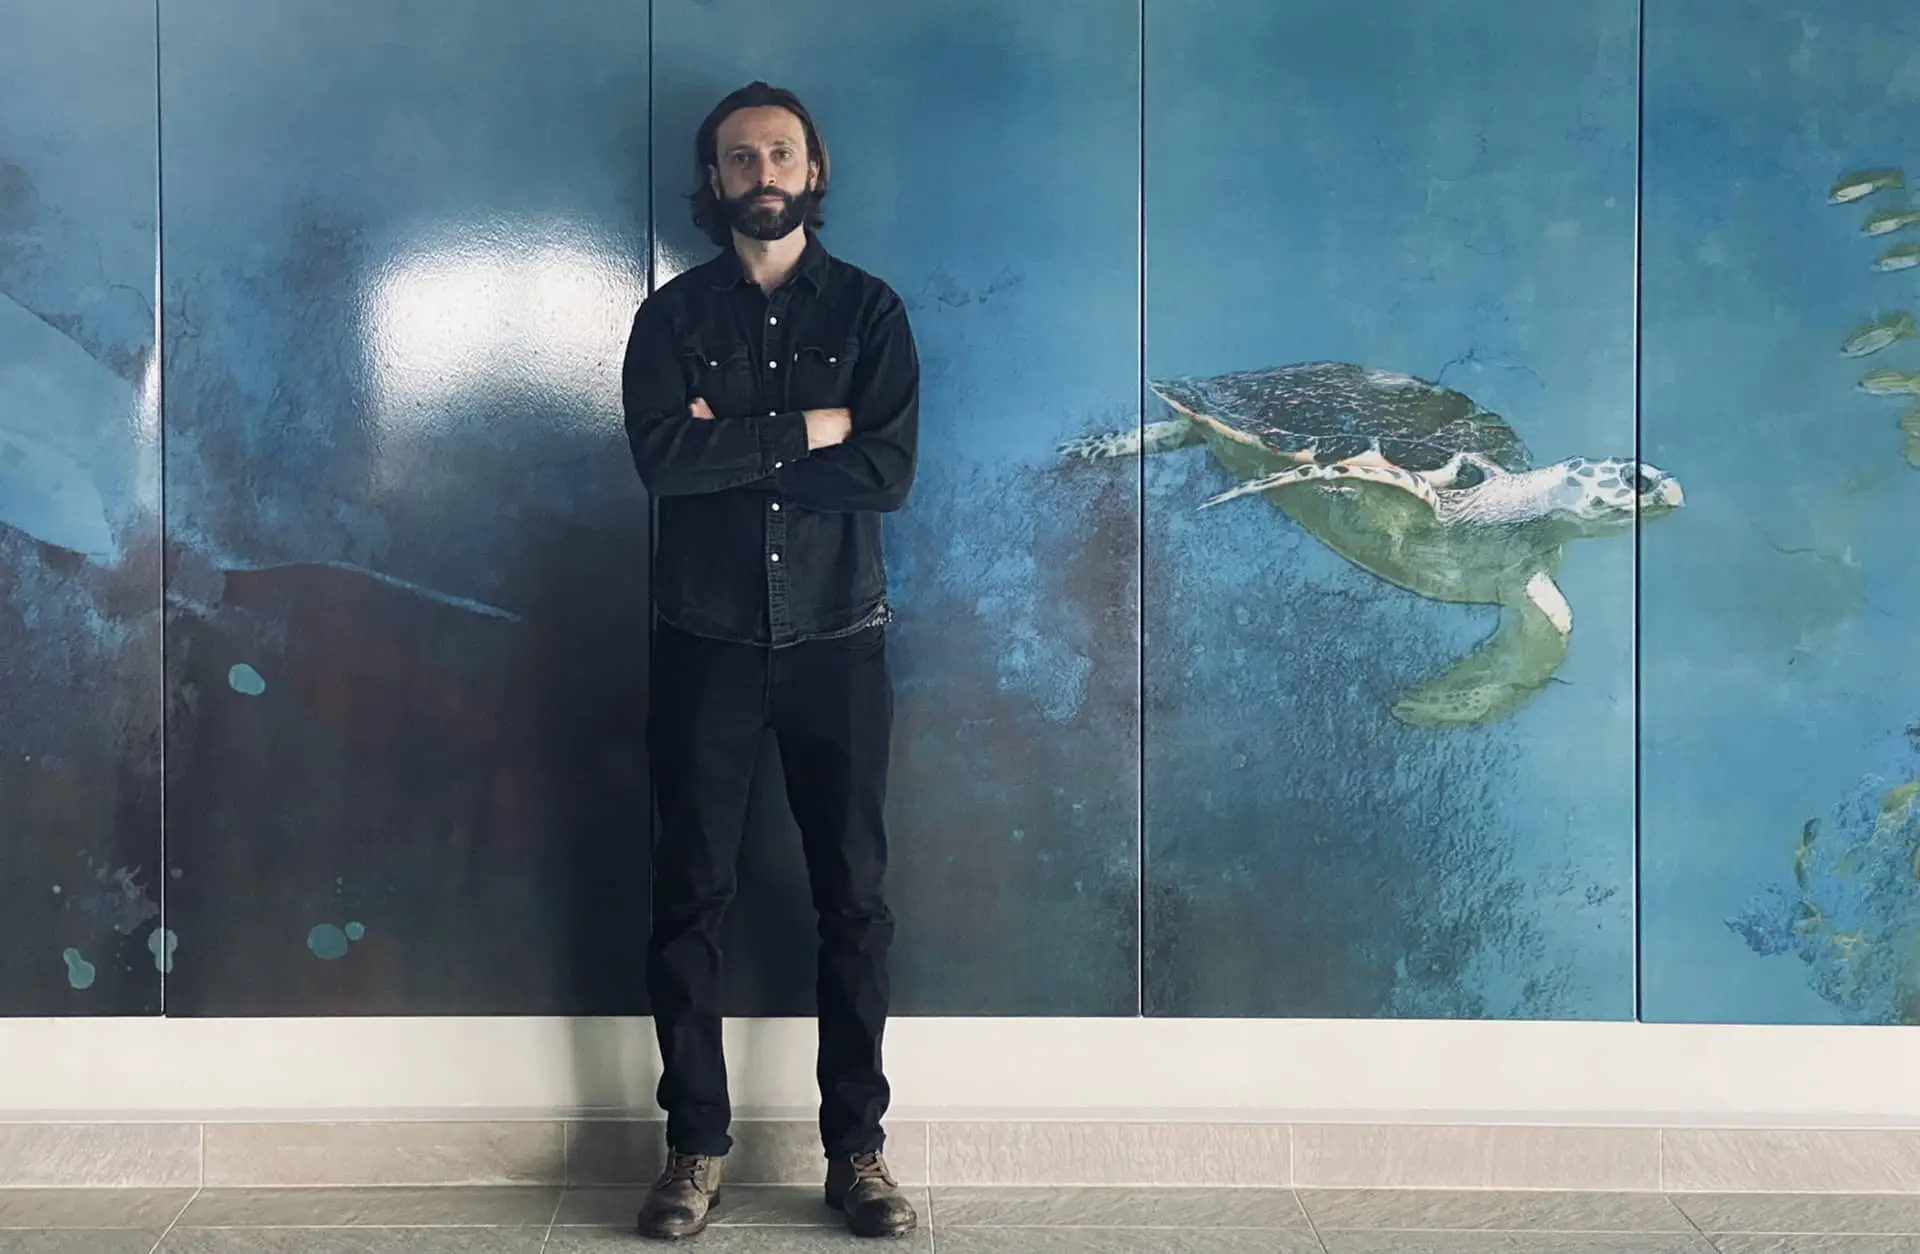 Jacob Light with his swimming pool mural